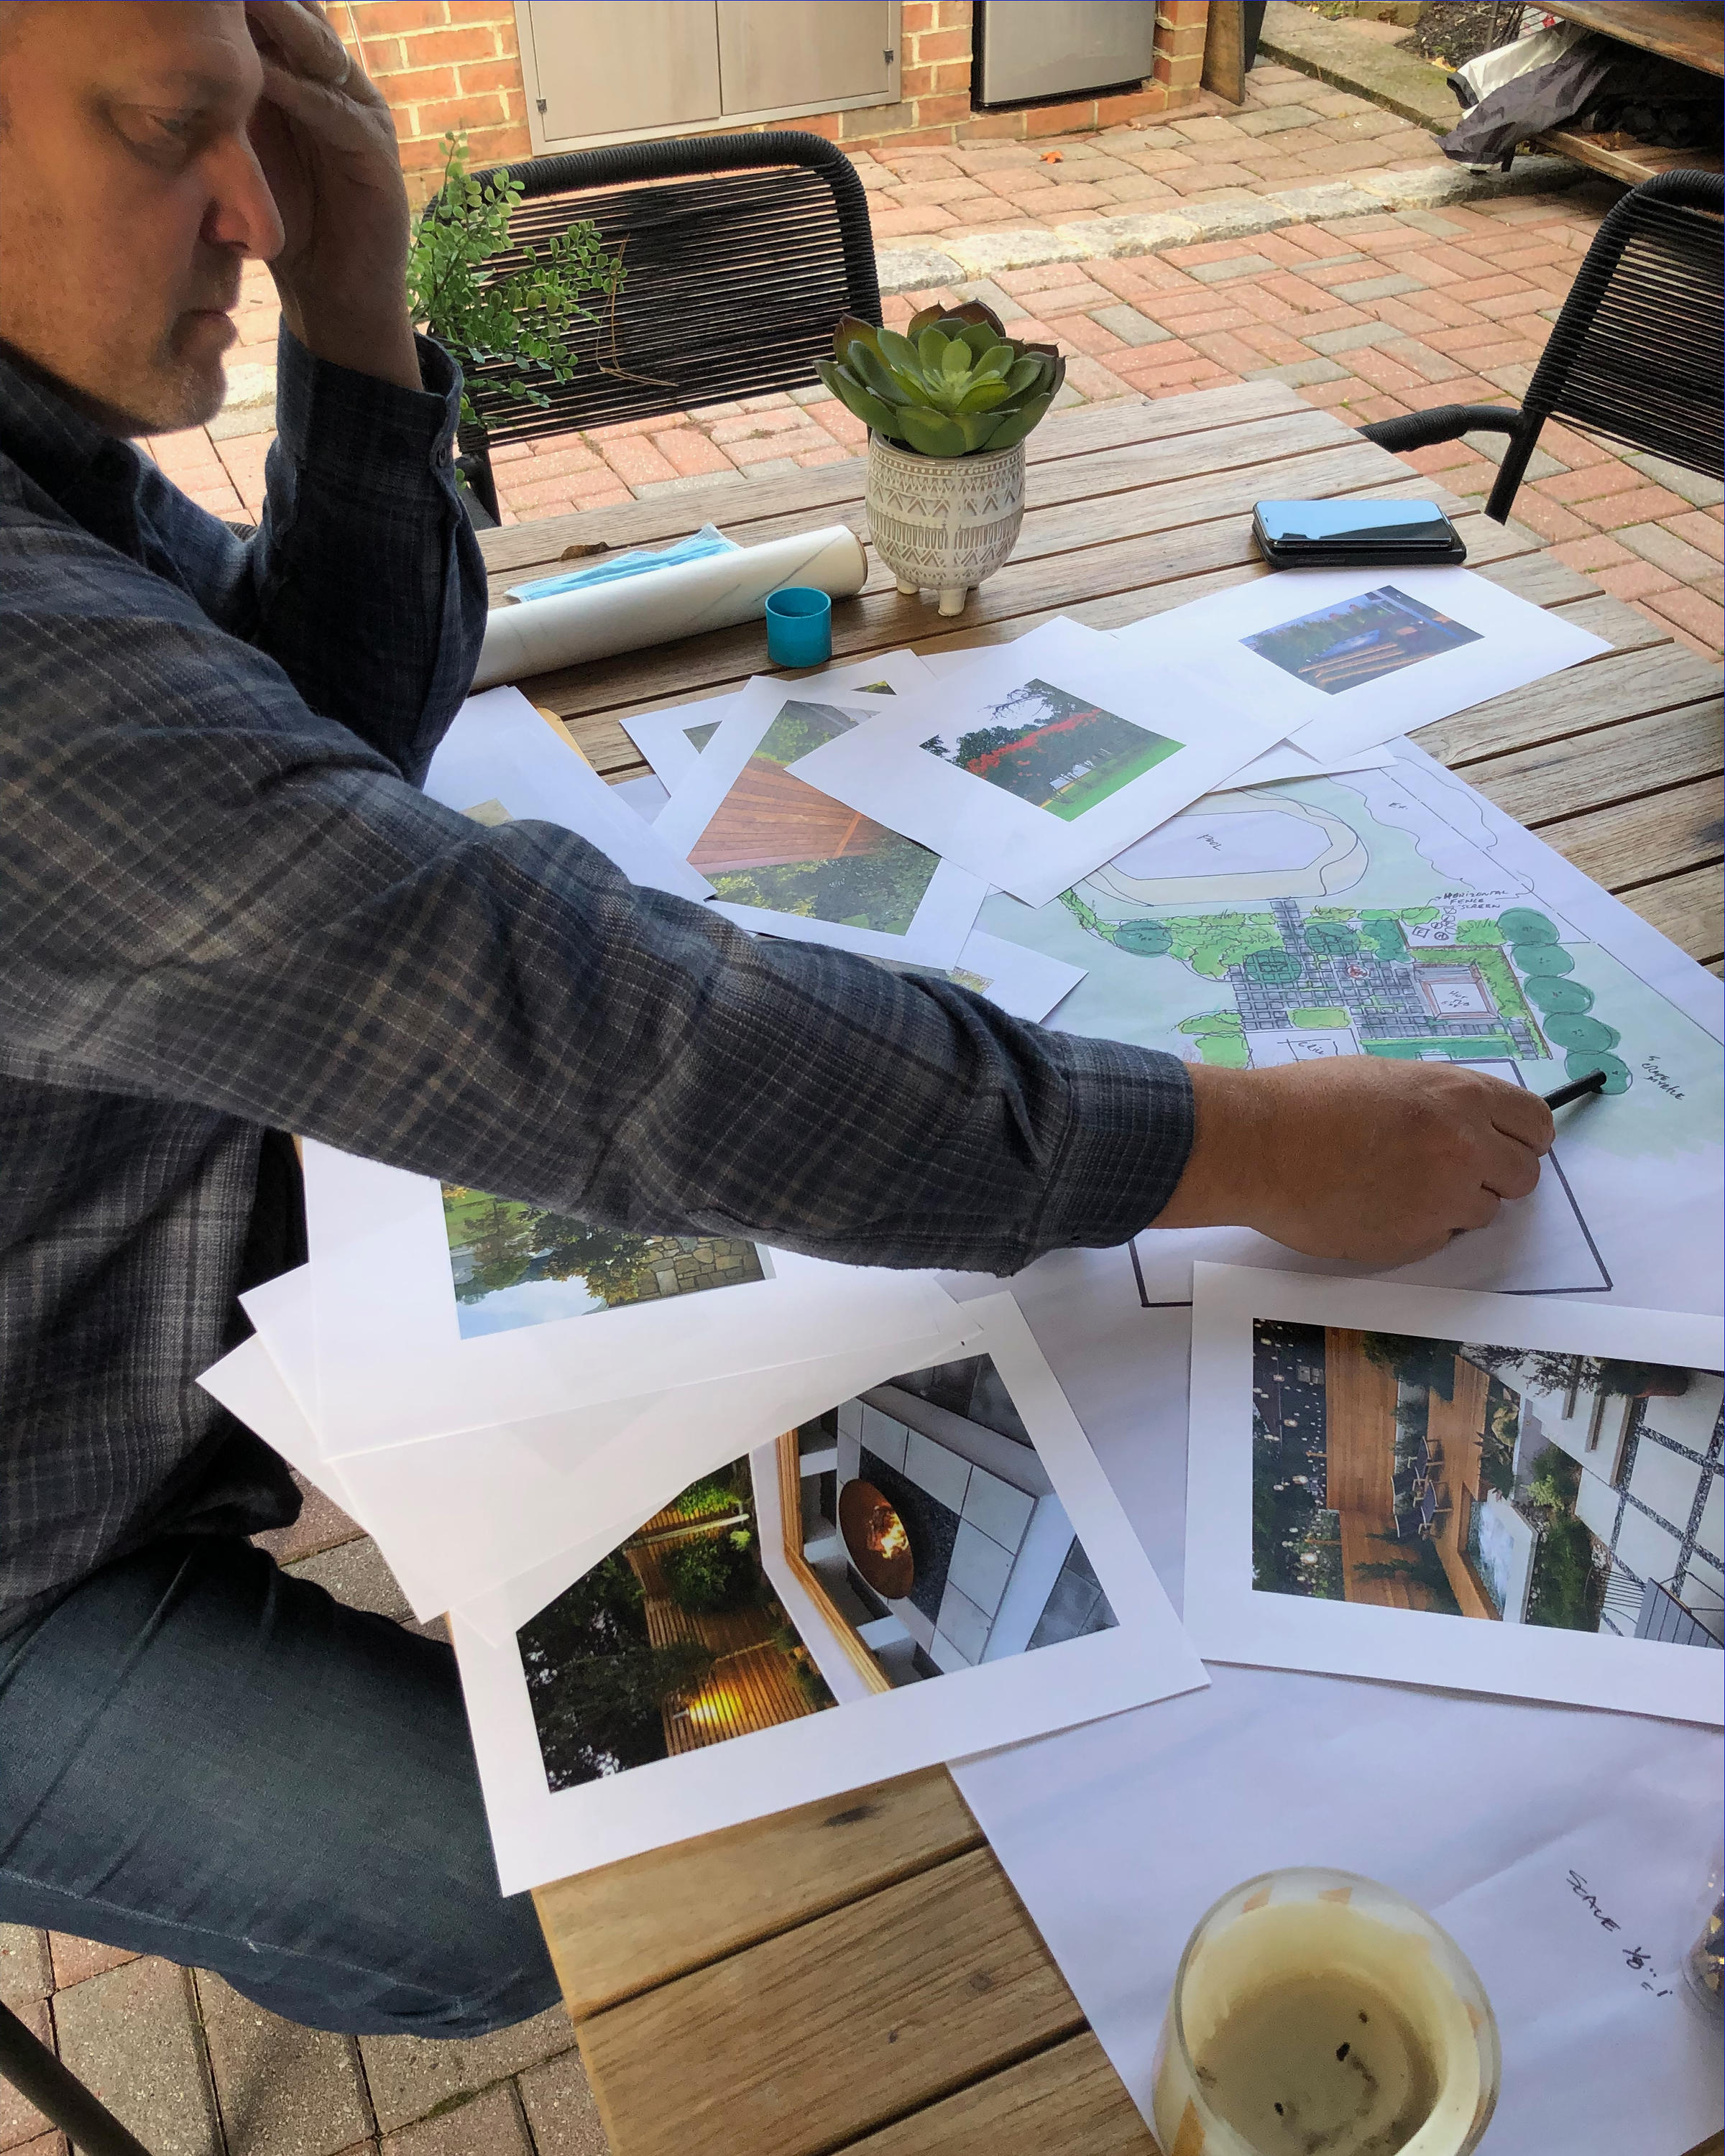 We love presenting our landscape design creations to our clients!  We  work with them to integrate their inspirations into a working concept. The wish list for this project includes:  Hot tub,  Natural wood seating & Fence, Plantings, Fire Pit, Sink, Walkway, and Pathways. www.gardenartisansllc.com 609-273-6519 609-647-0666 609-371-0099